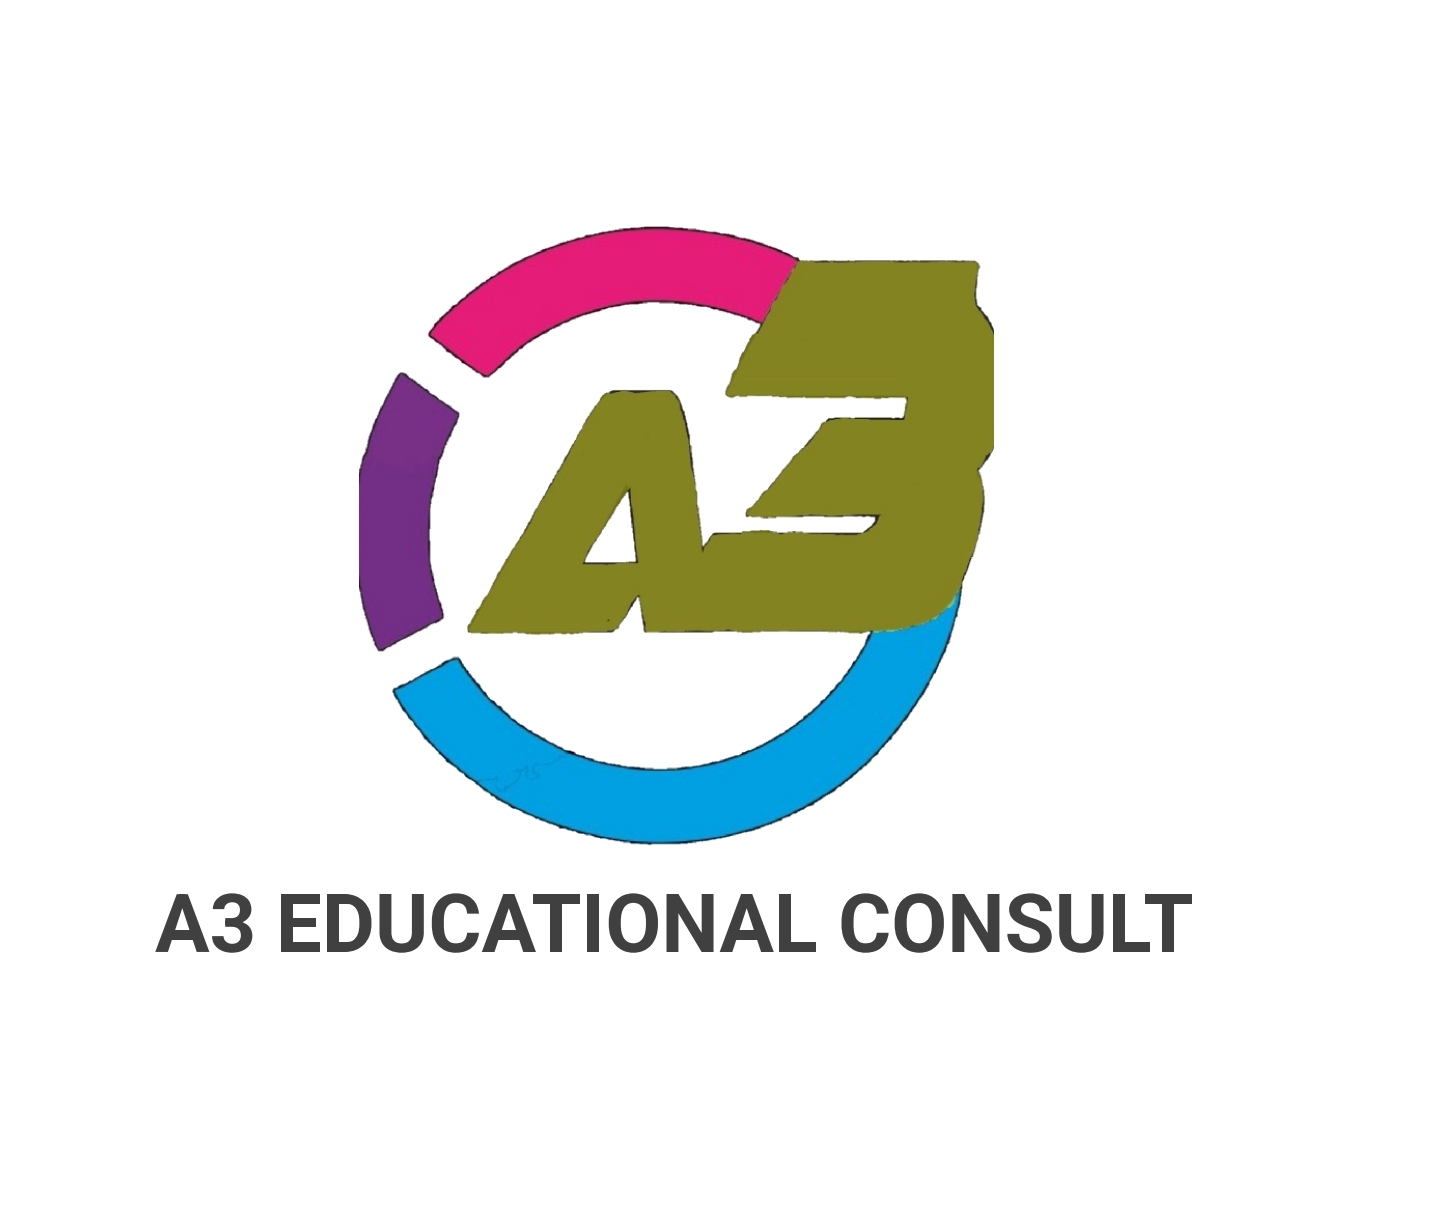 A3 EDUCATIONAL CONSULT